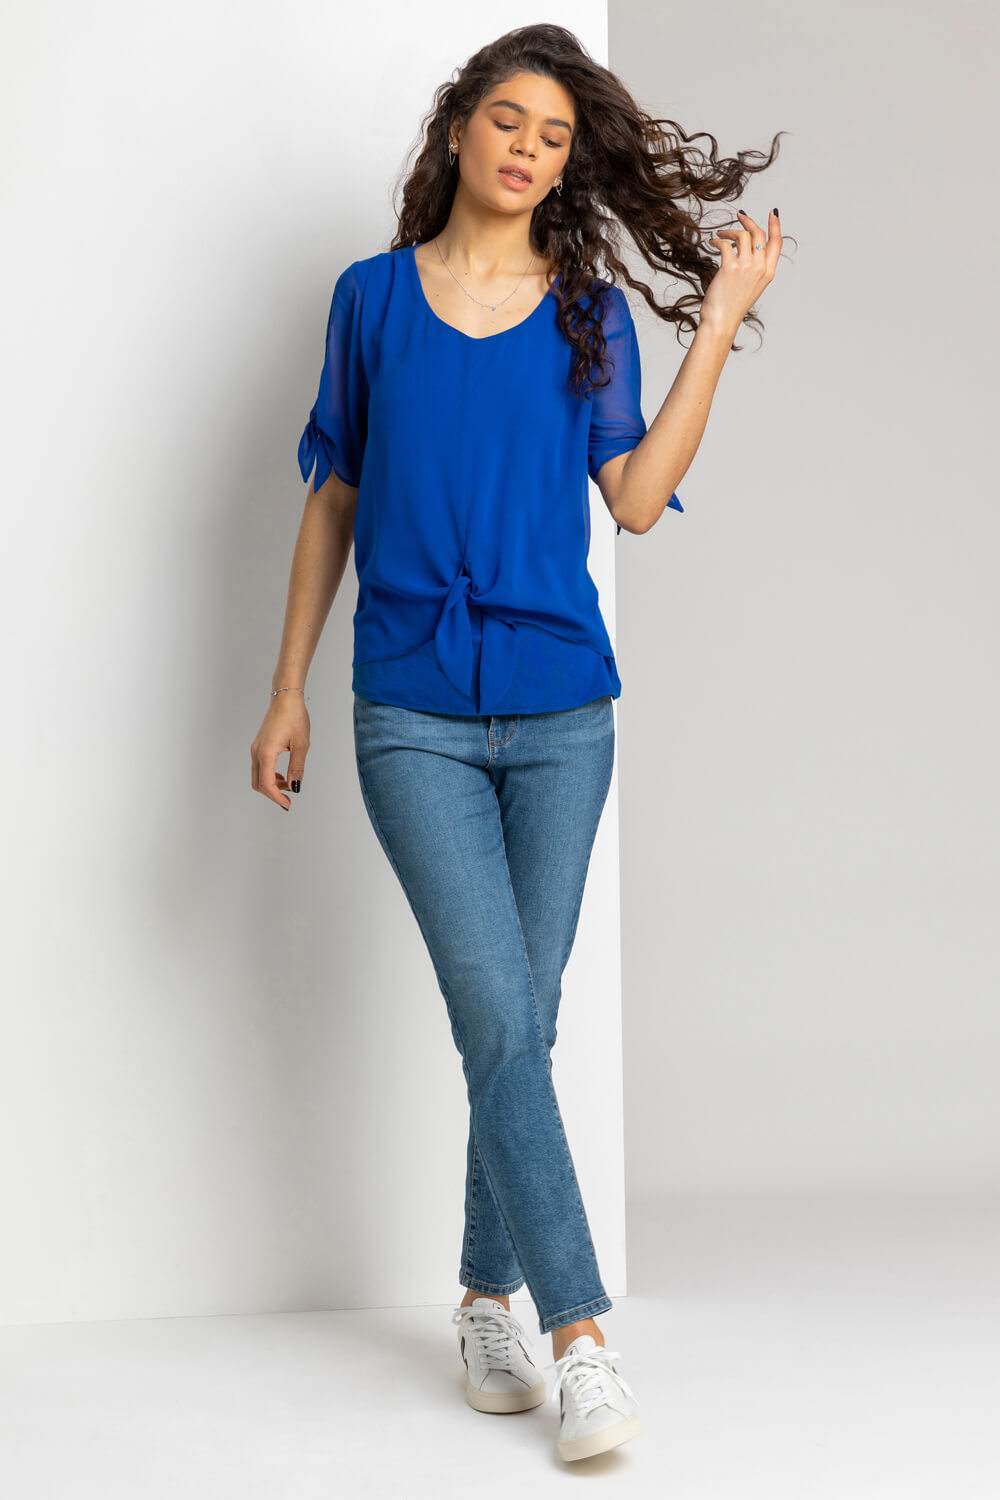 Royal Blue Chiffon Layered Tie Front Top, Image 3 of 4